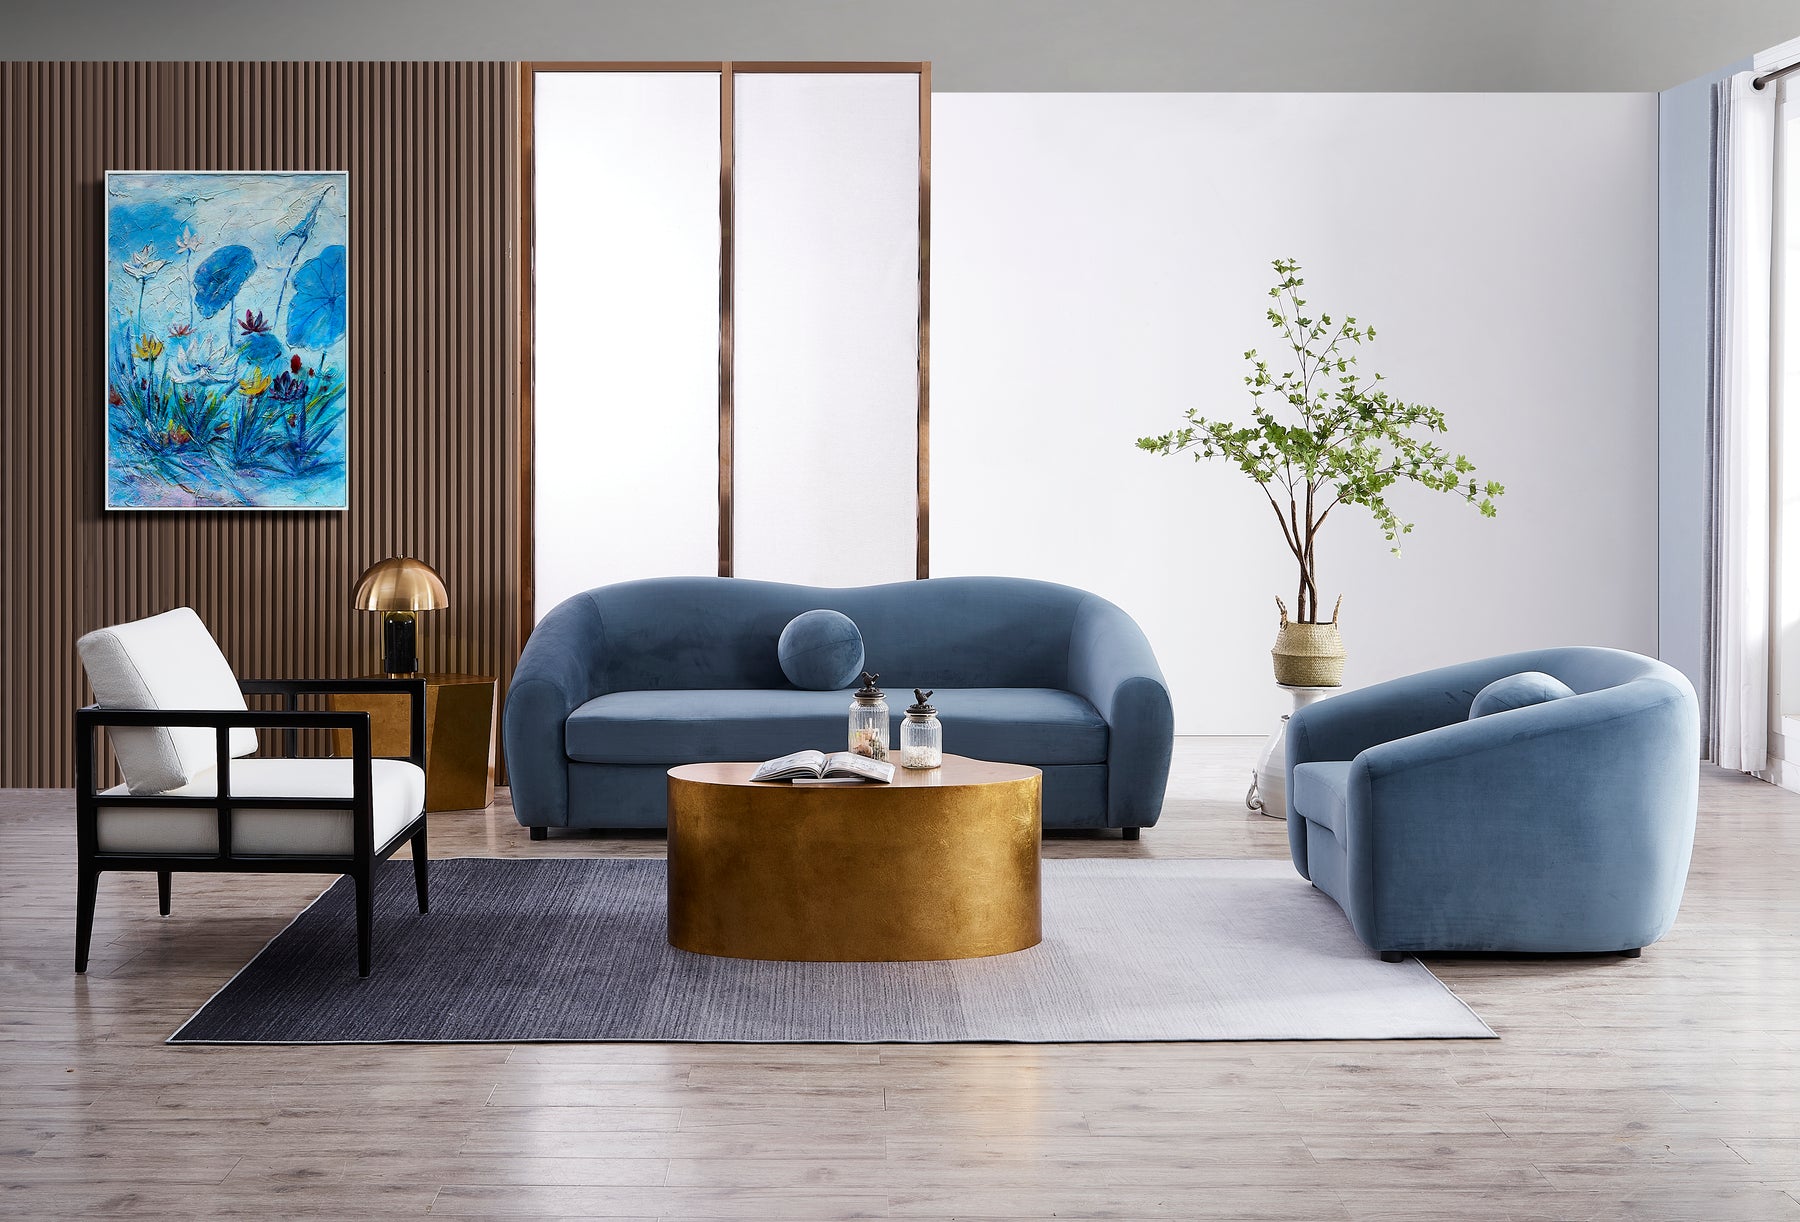 Louis Dusty Blue Velvet Armchair and 3 Seater Sofa Front On View in a Room Setting